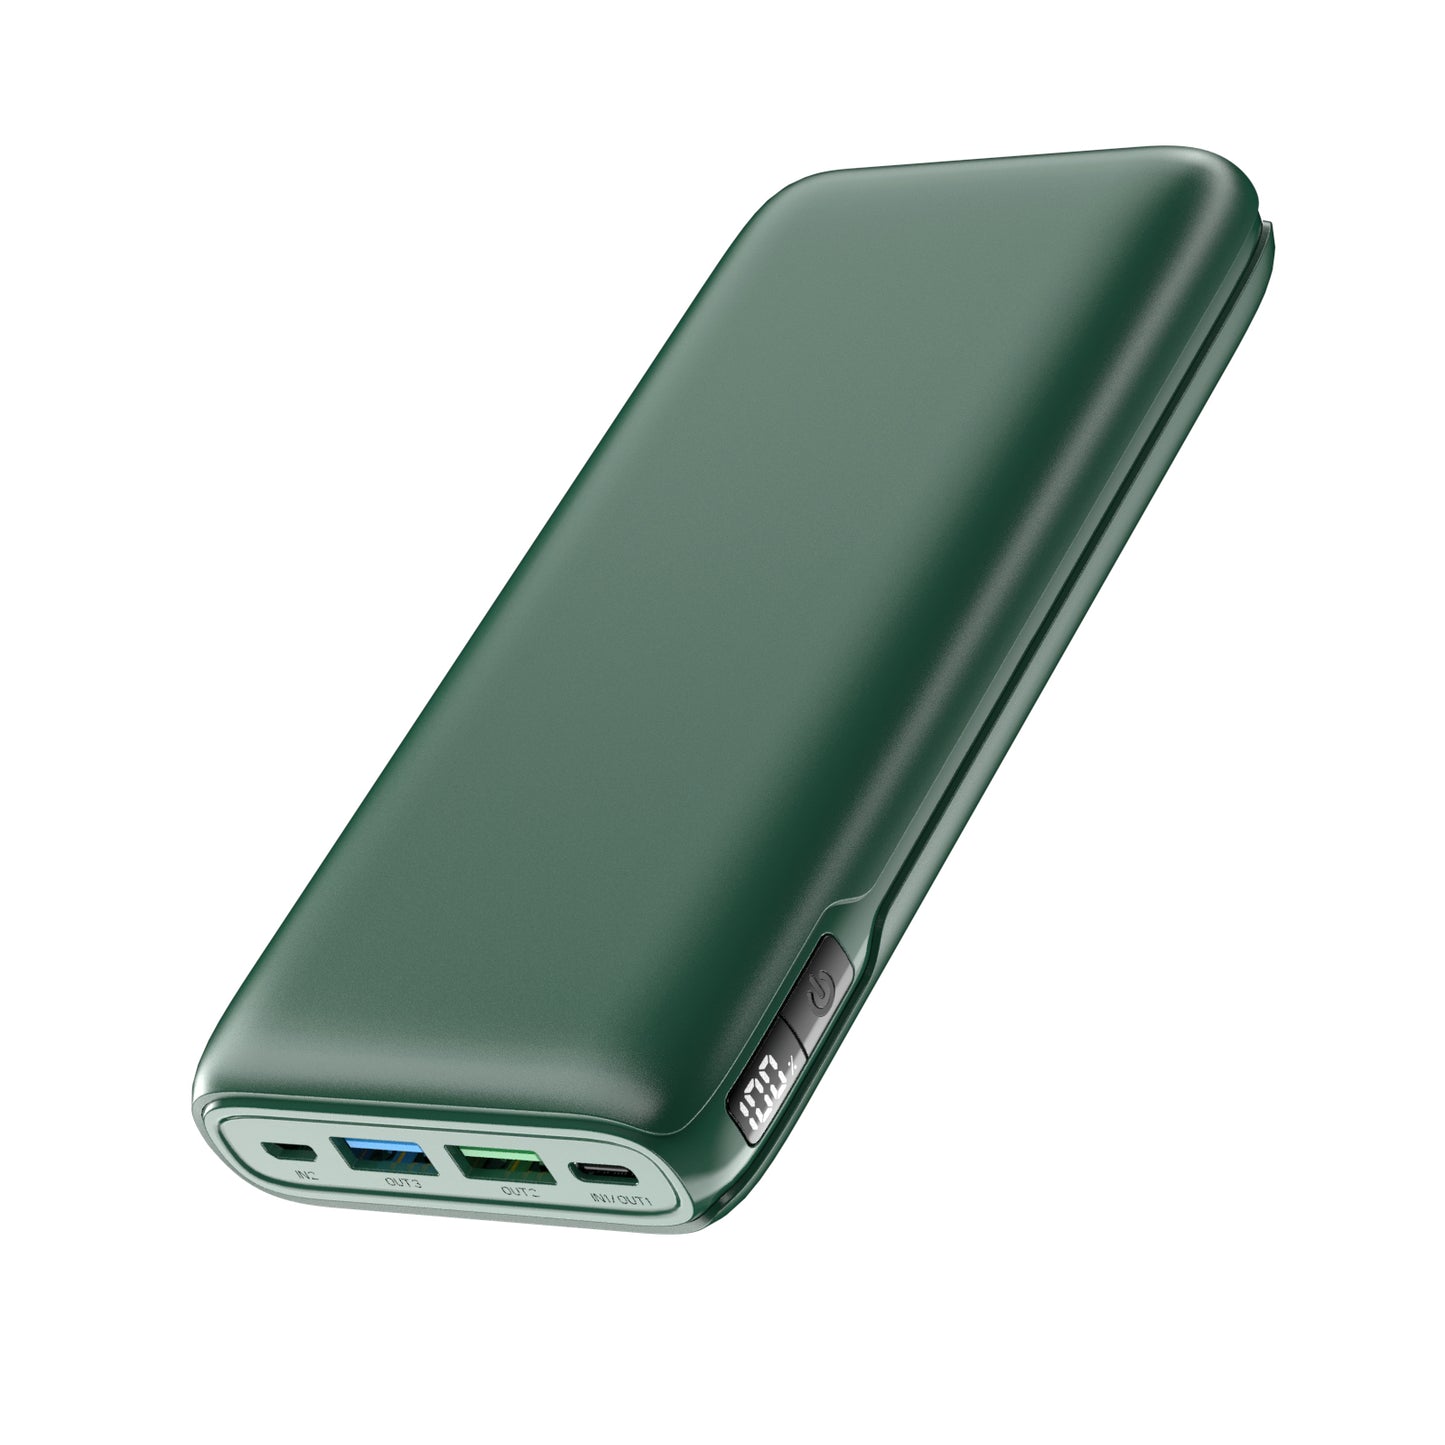 Power Bank 20000mAh External Battery with 4 Outputs - Green